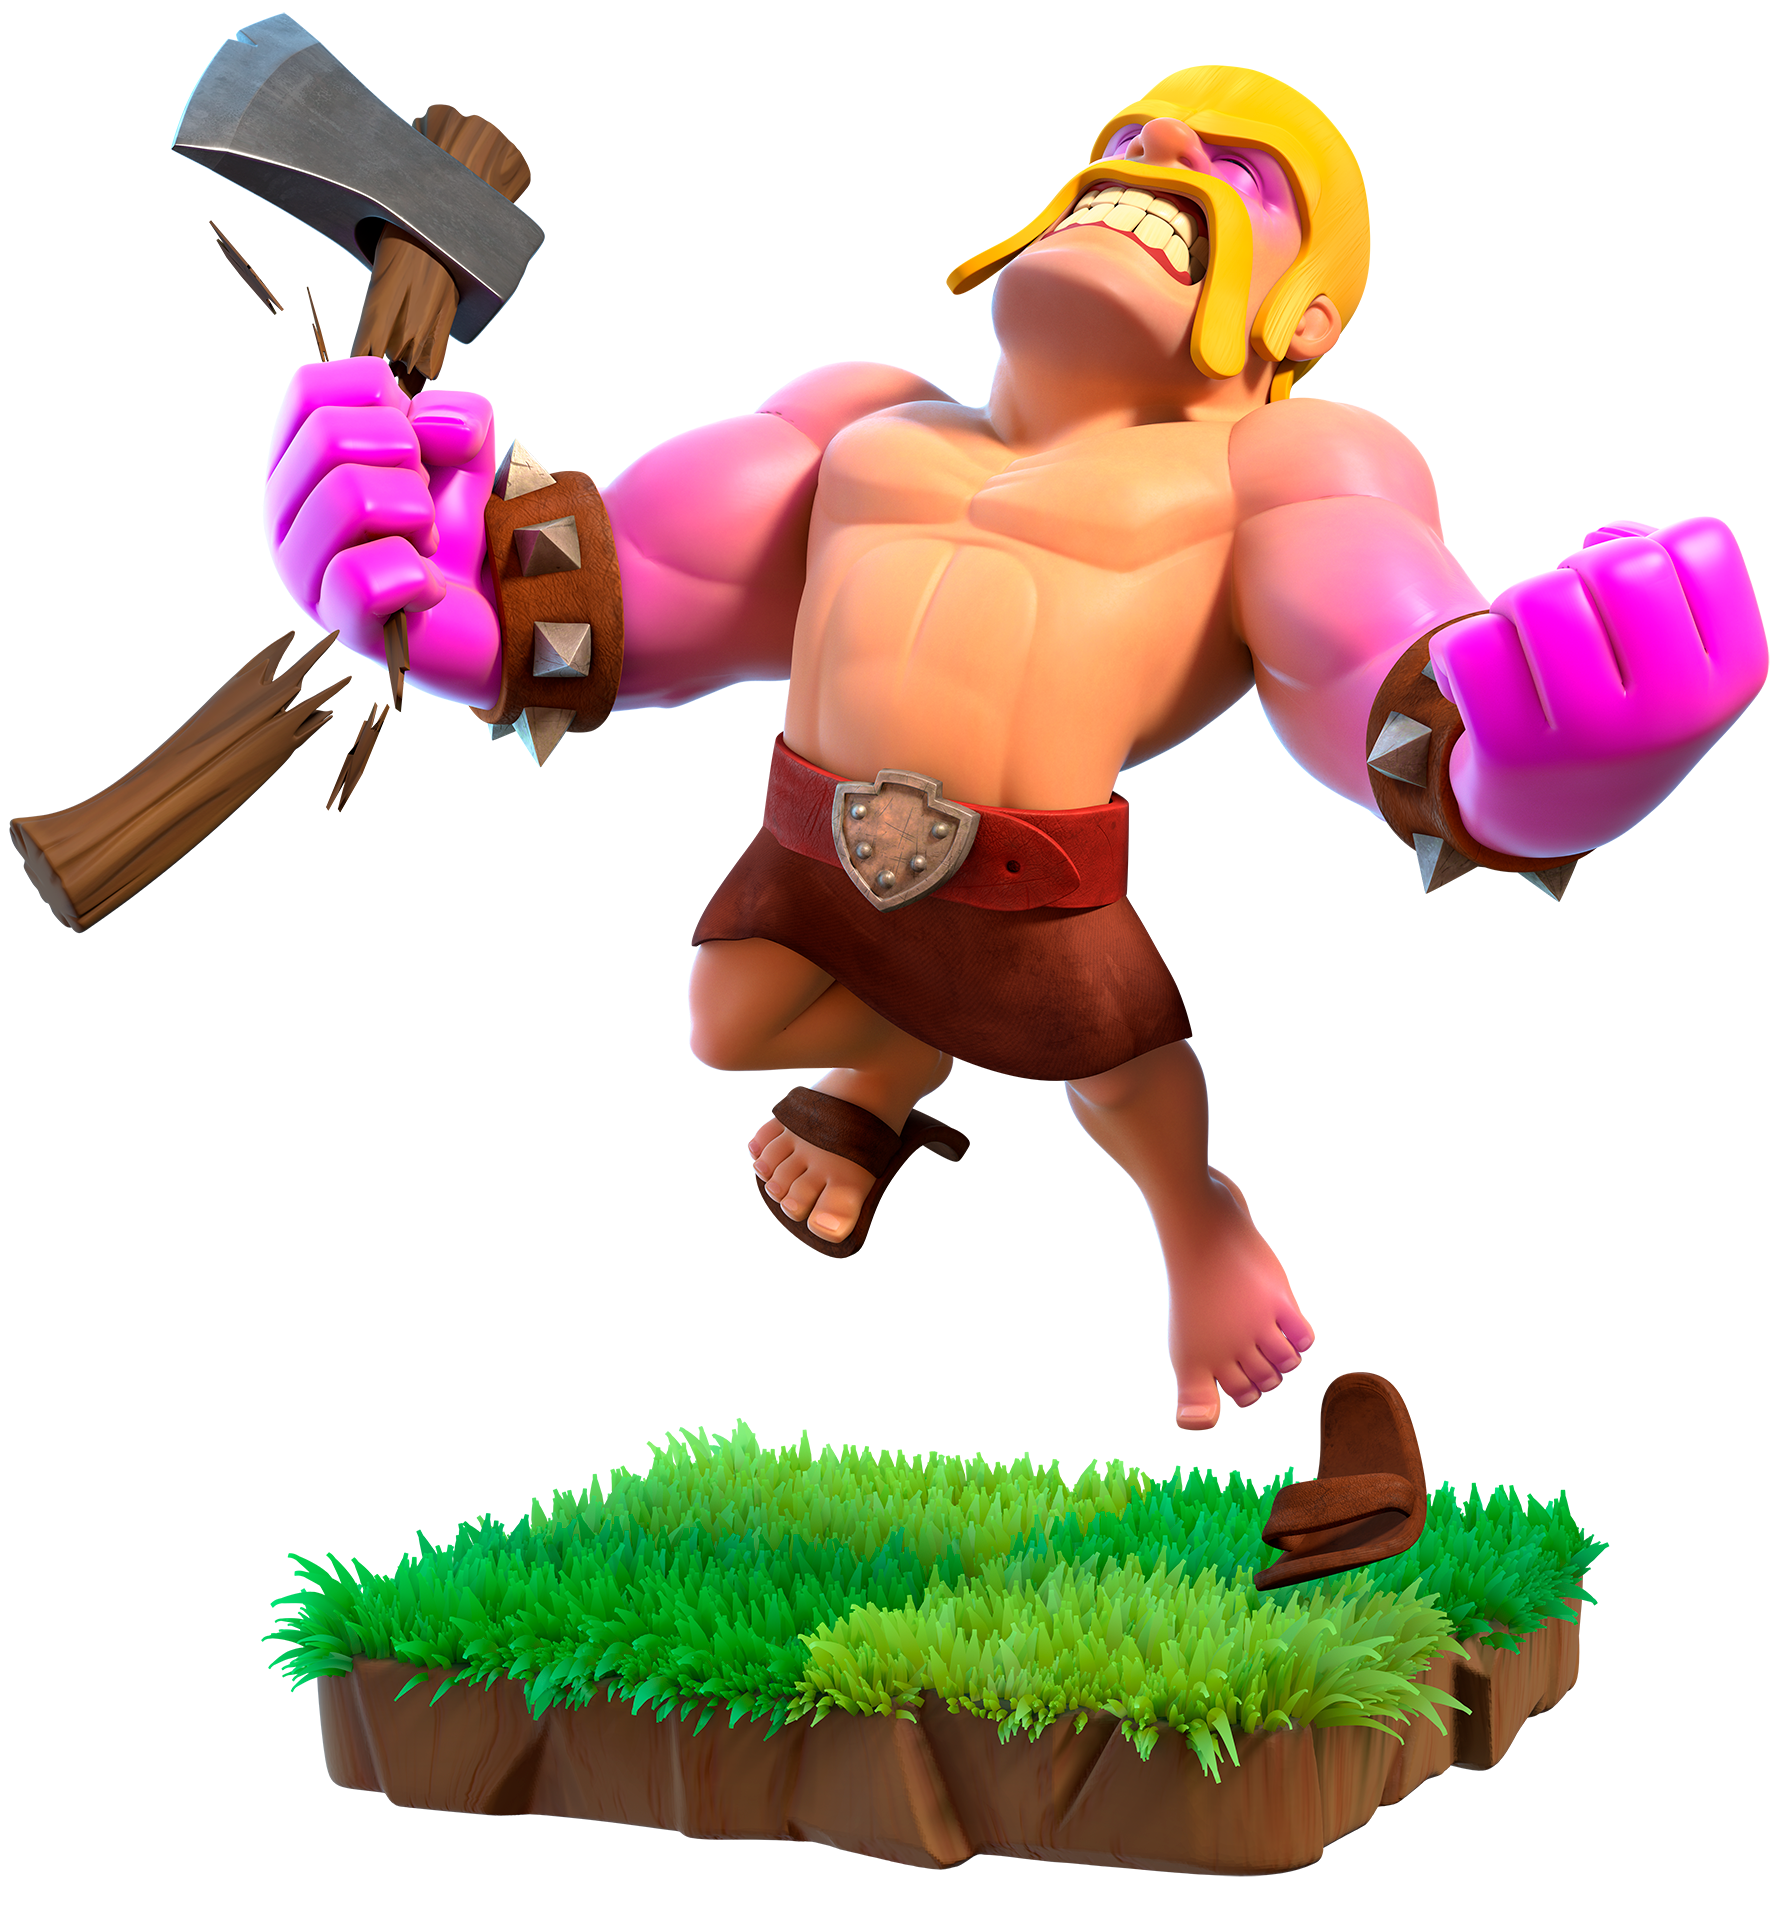 clash of clans super troops